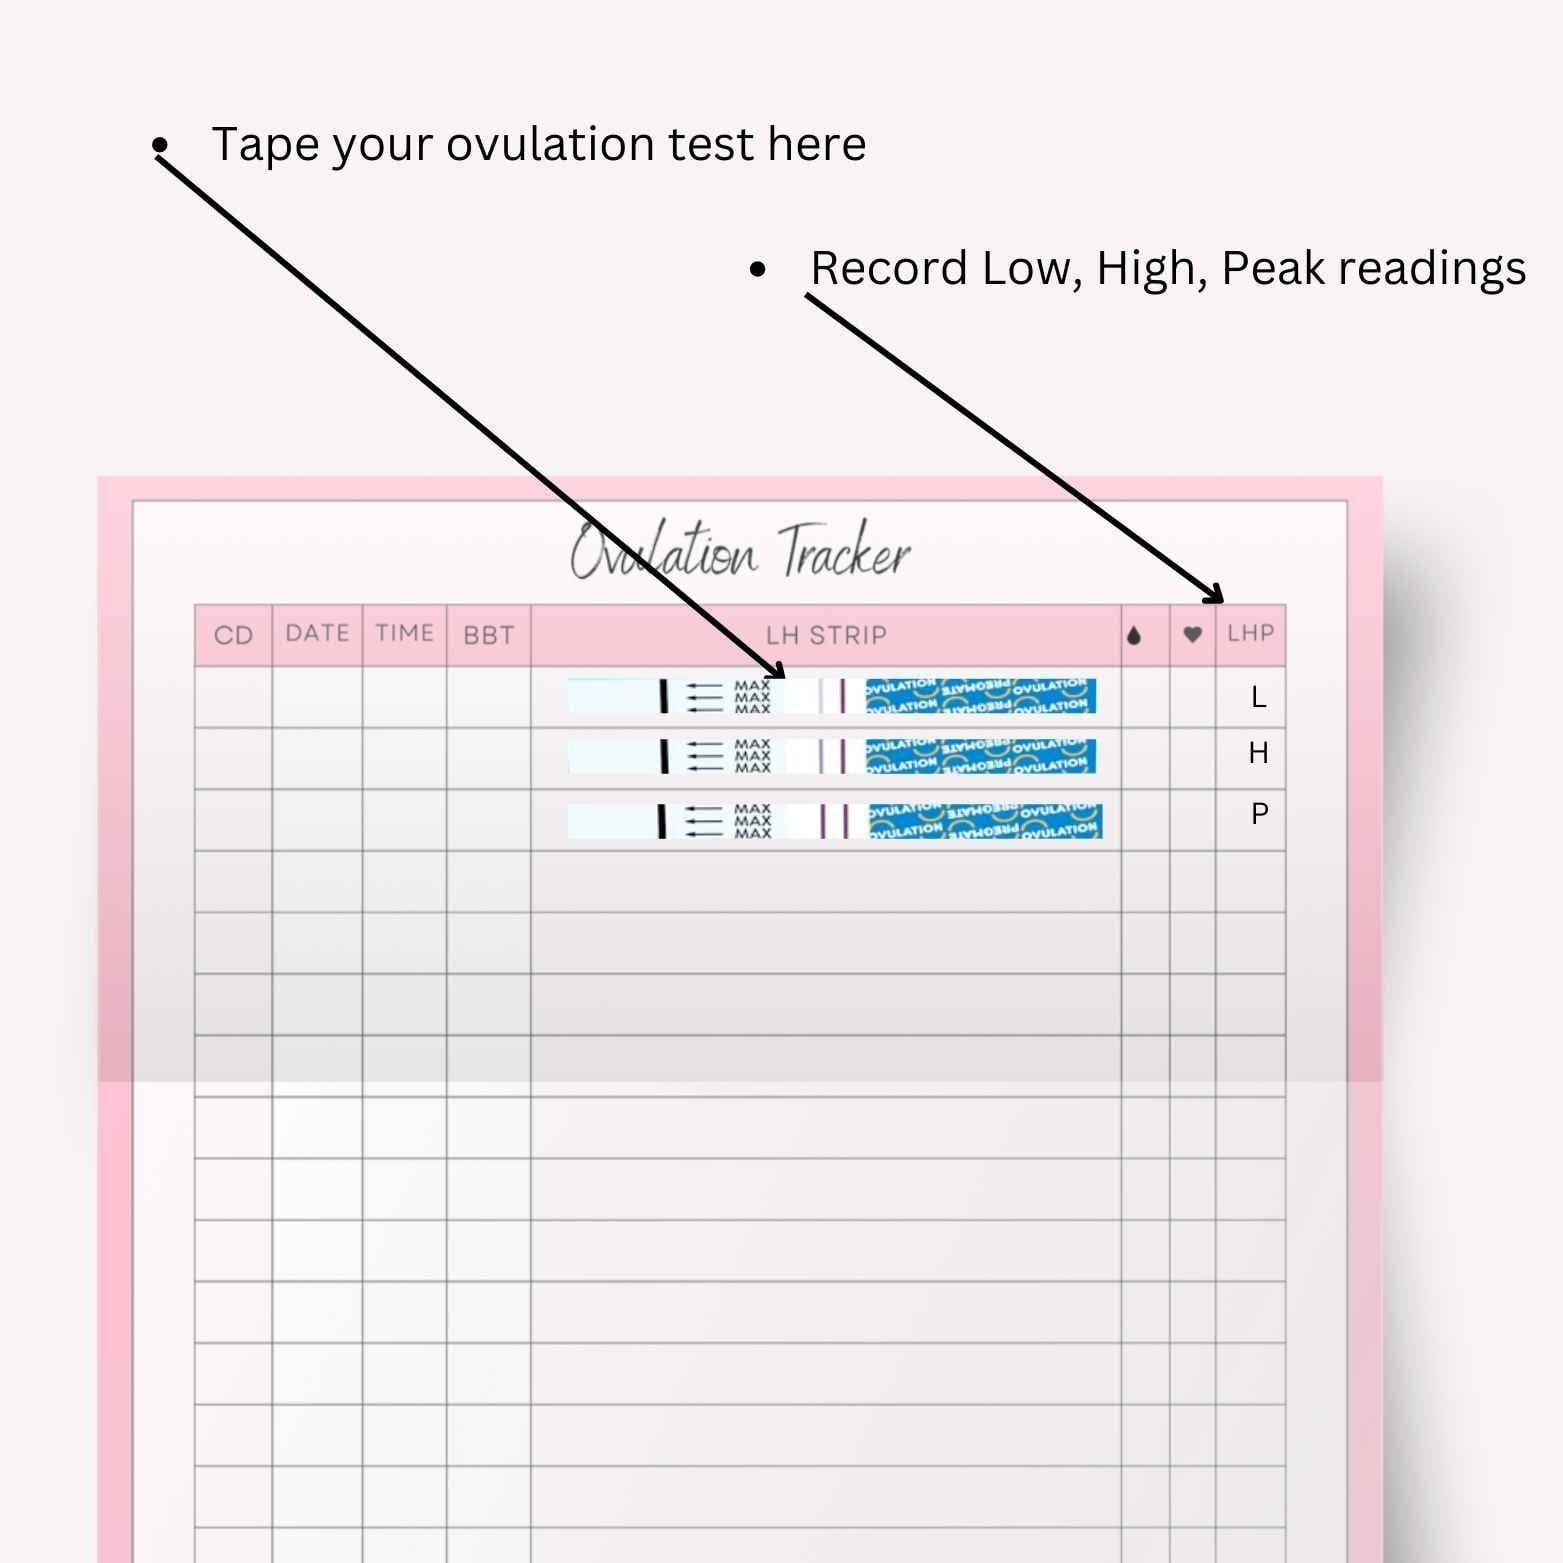 Ovulation Lh strip tracker to record low high and peak to tape your strip